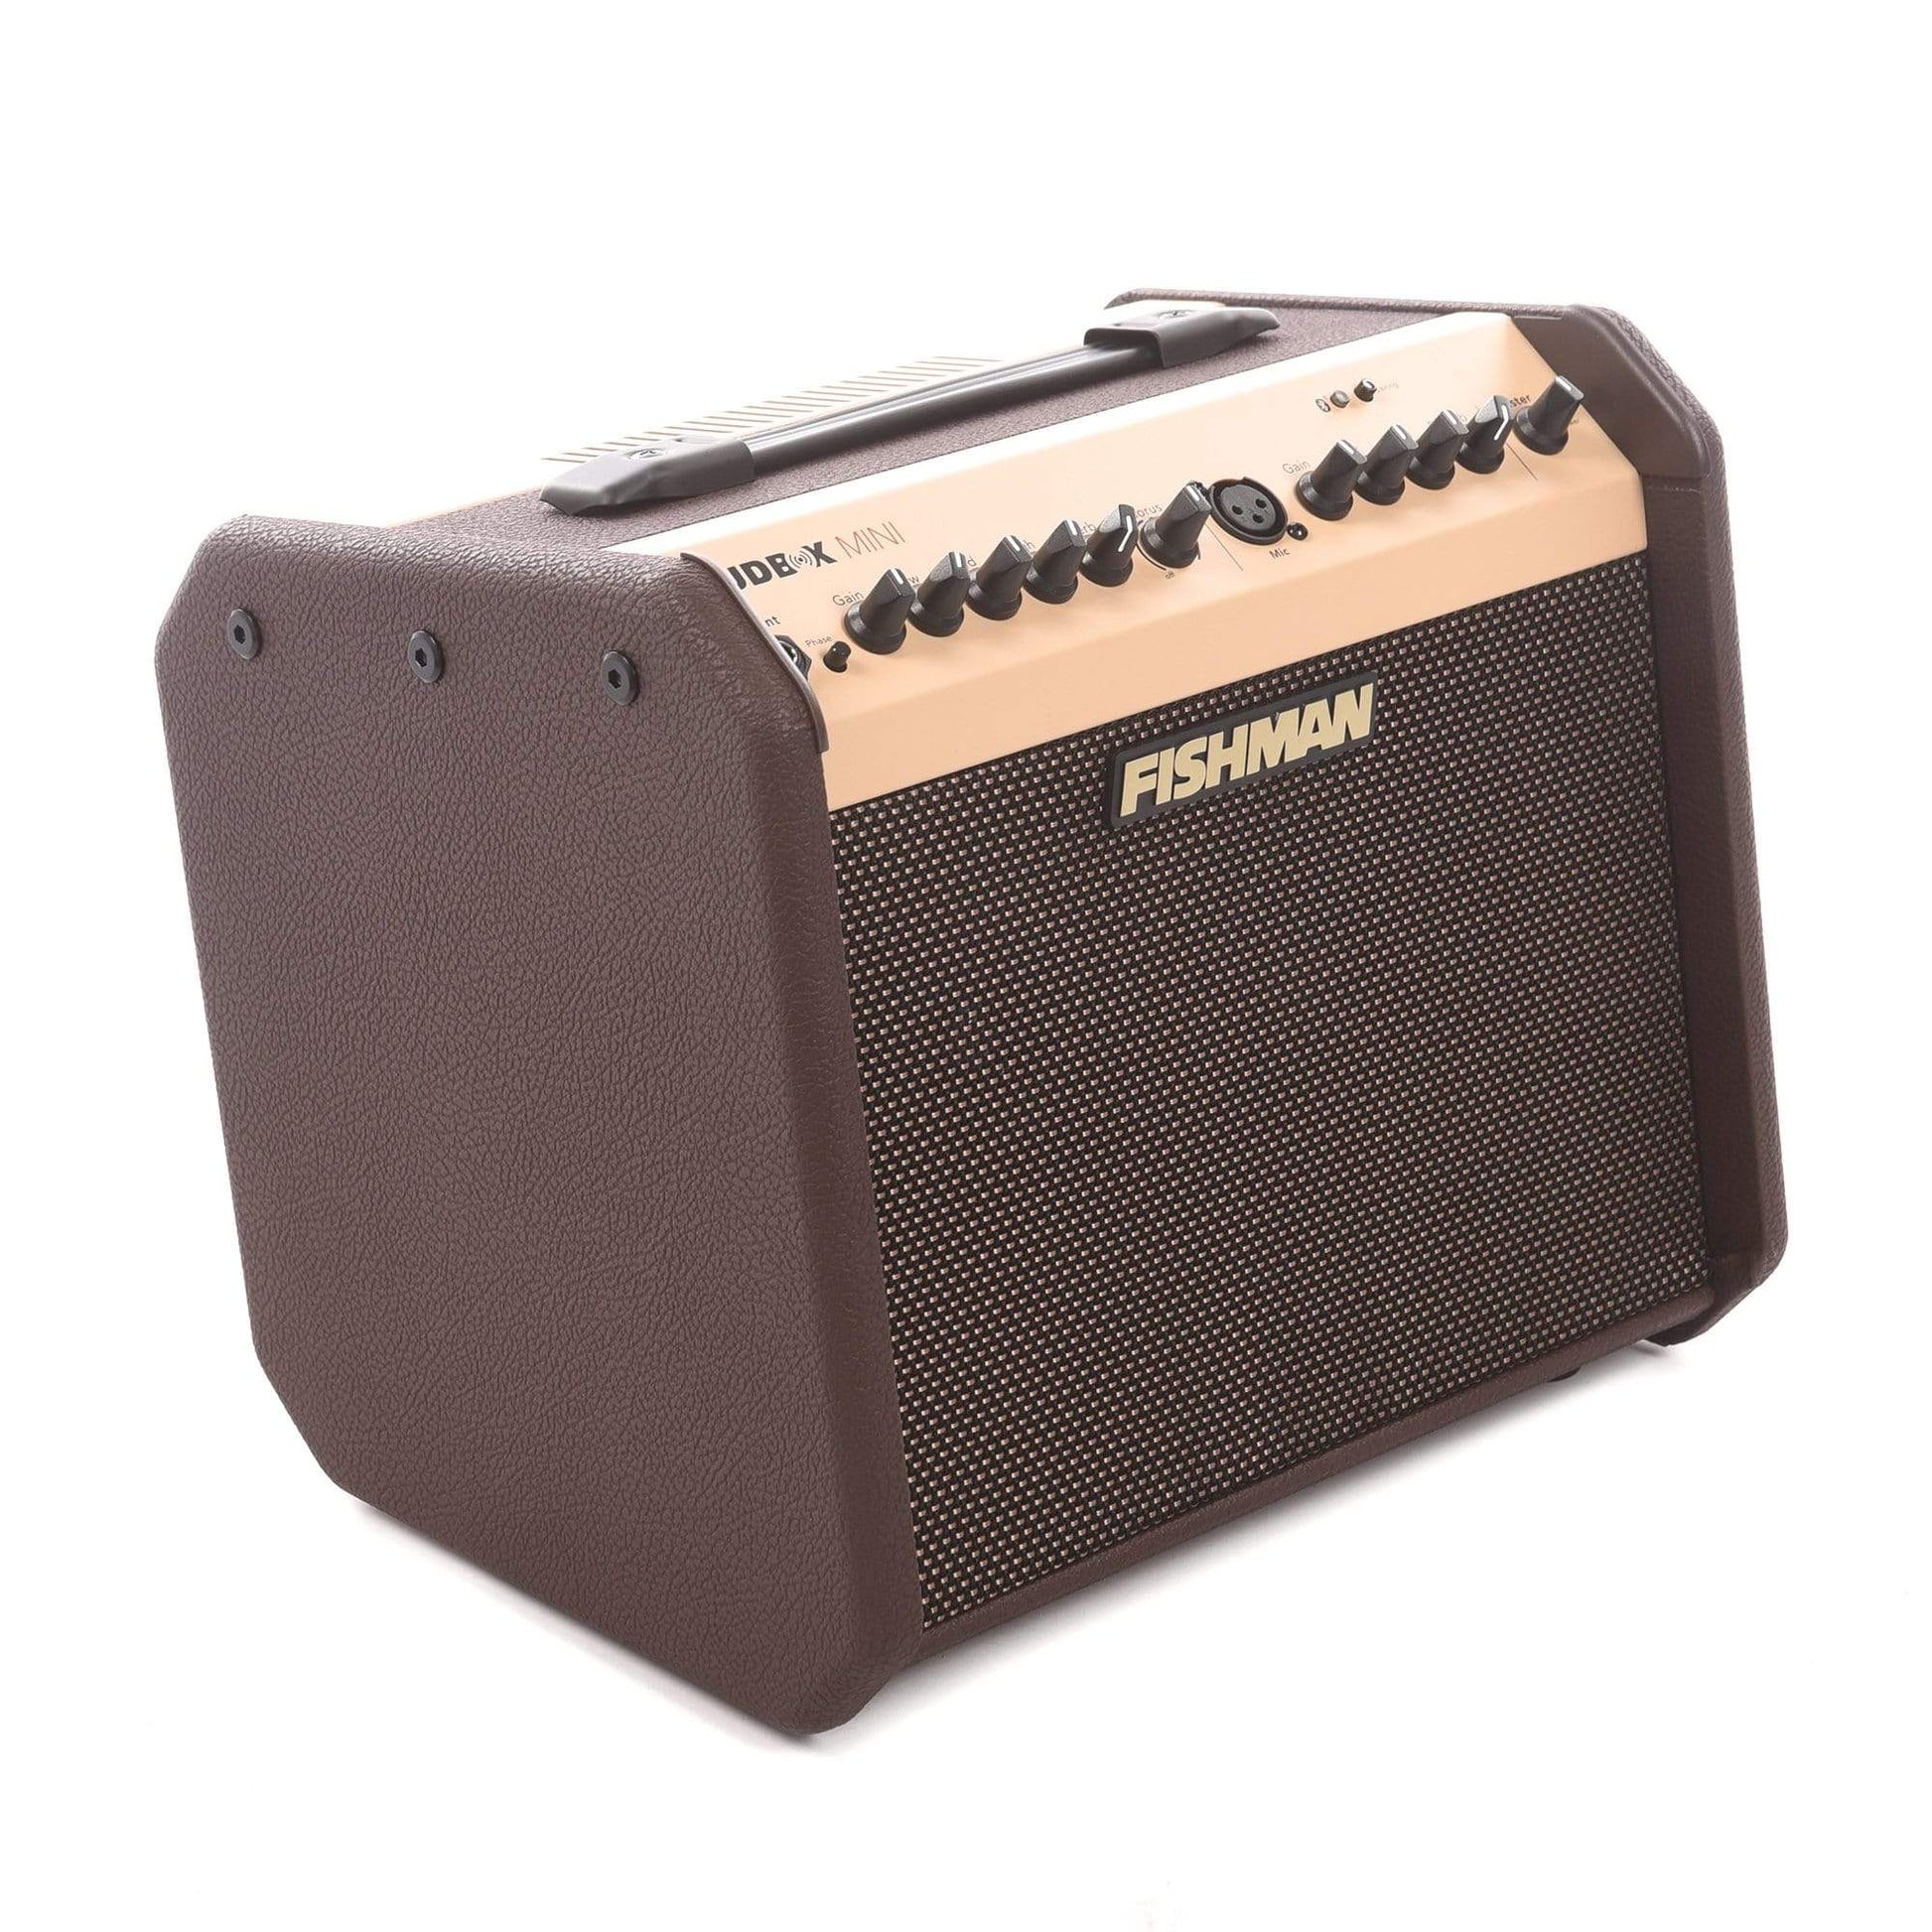 Fishman Loudbox Mini Bluetooth 60W w/Mini Slip Cover and FT-2 Clip-On Digital Tuner Amps / Acoustic Amps